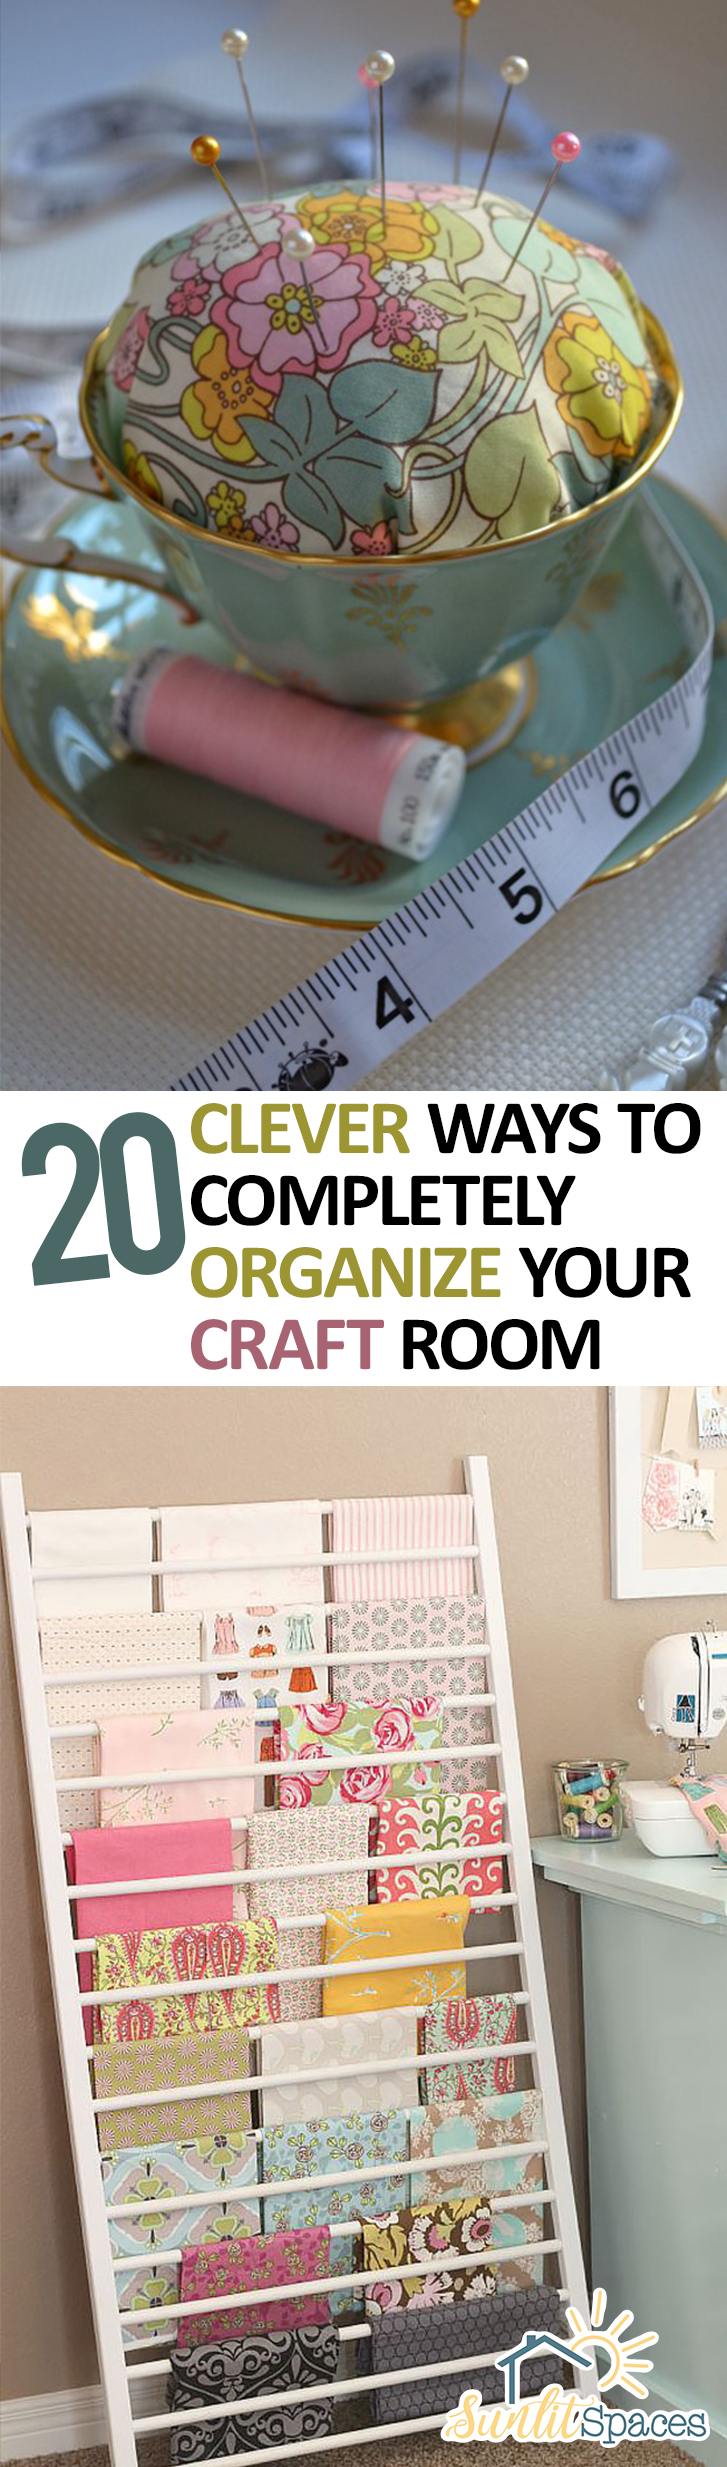 How to Organize Your Craft Room, Craft Room Organization, Craft Room Organization Ideas, Organization Ideas for the Home, Craft Room, Dream Craft Room, Organization, Home Organization, Popular Pin